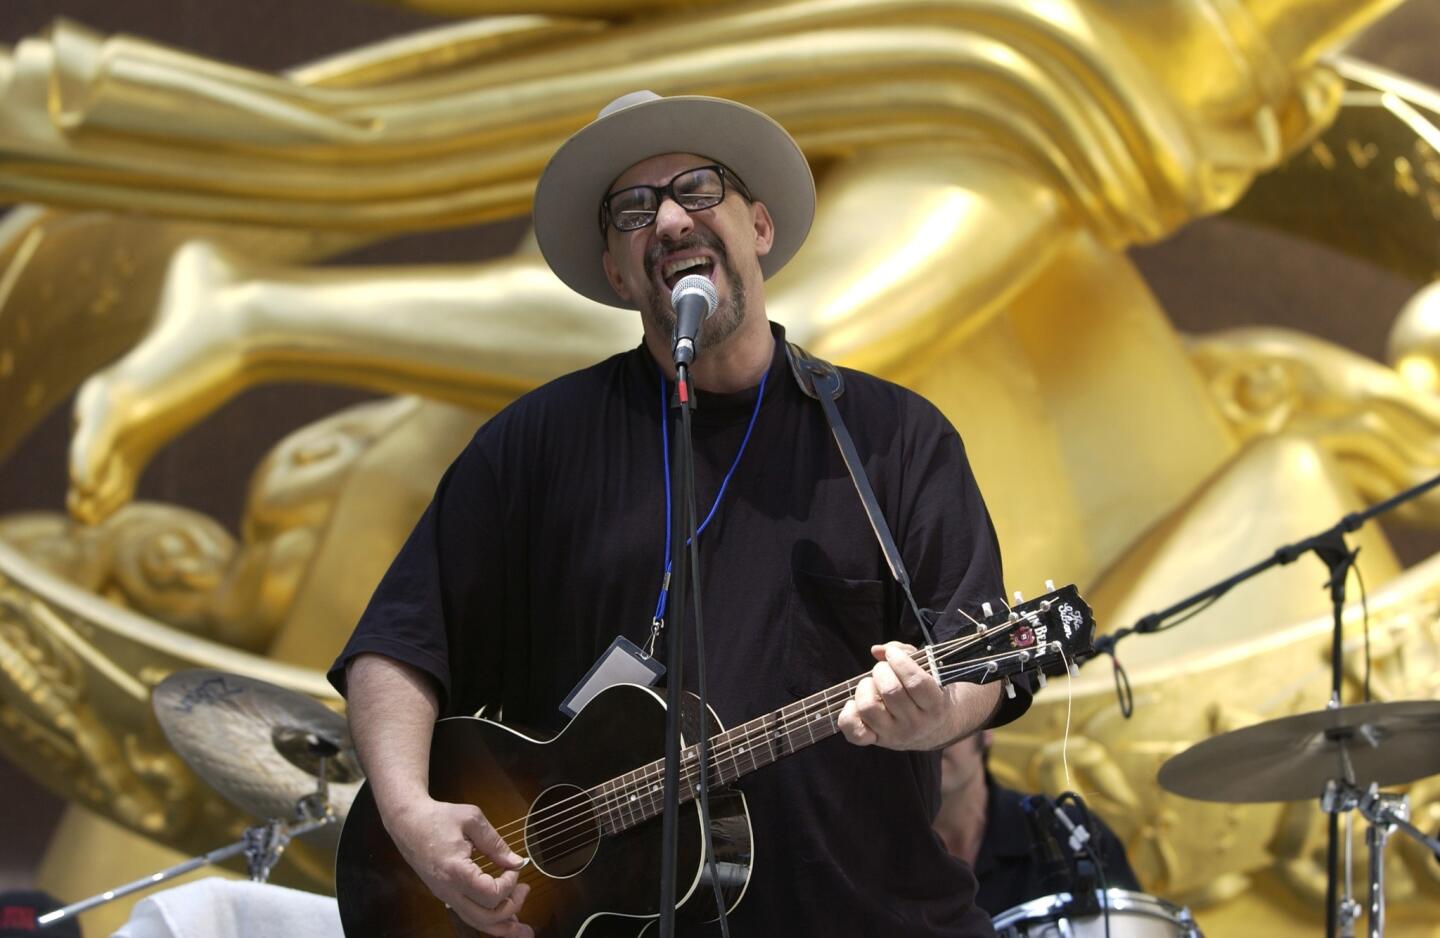 Pat DiNizio, vocalist-guitarist-songwriter for the tough yet tuneful New Jersey rock band the Smithereens, died on Dec. 12, 2017. He was 62. Read more.